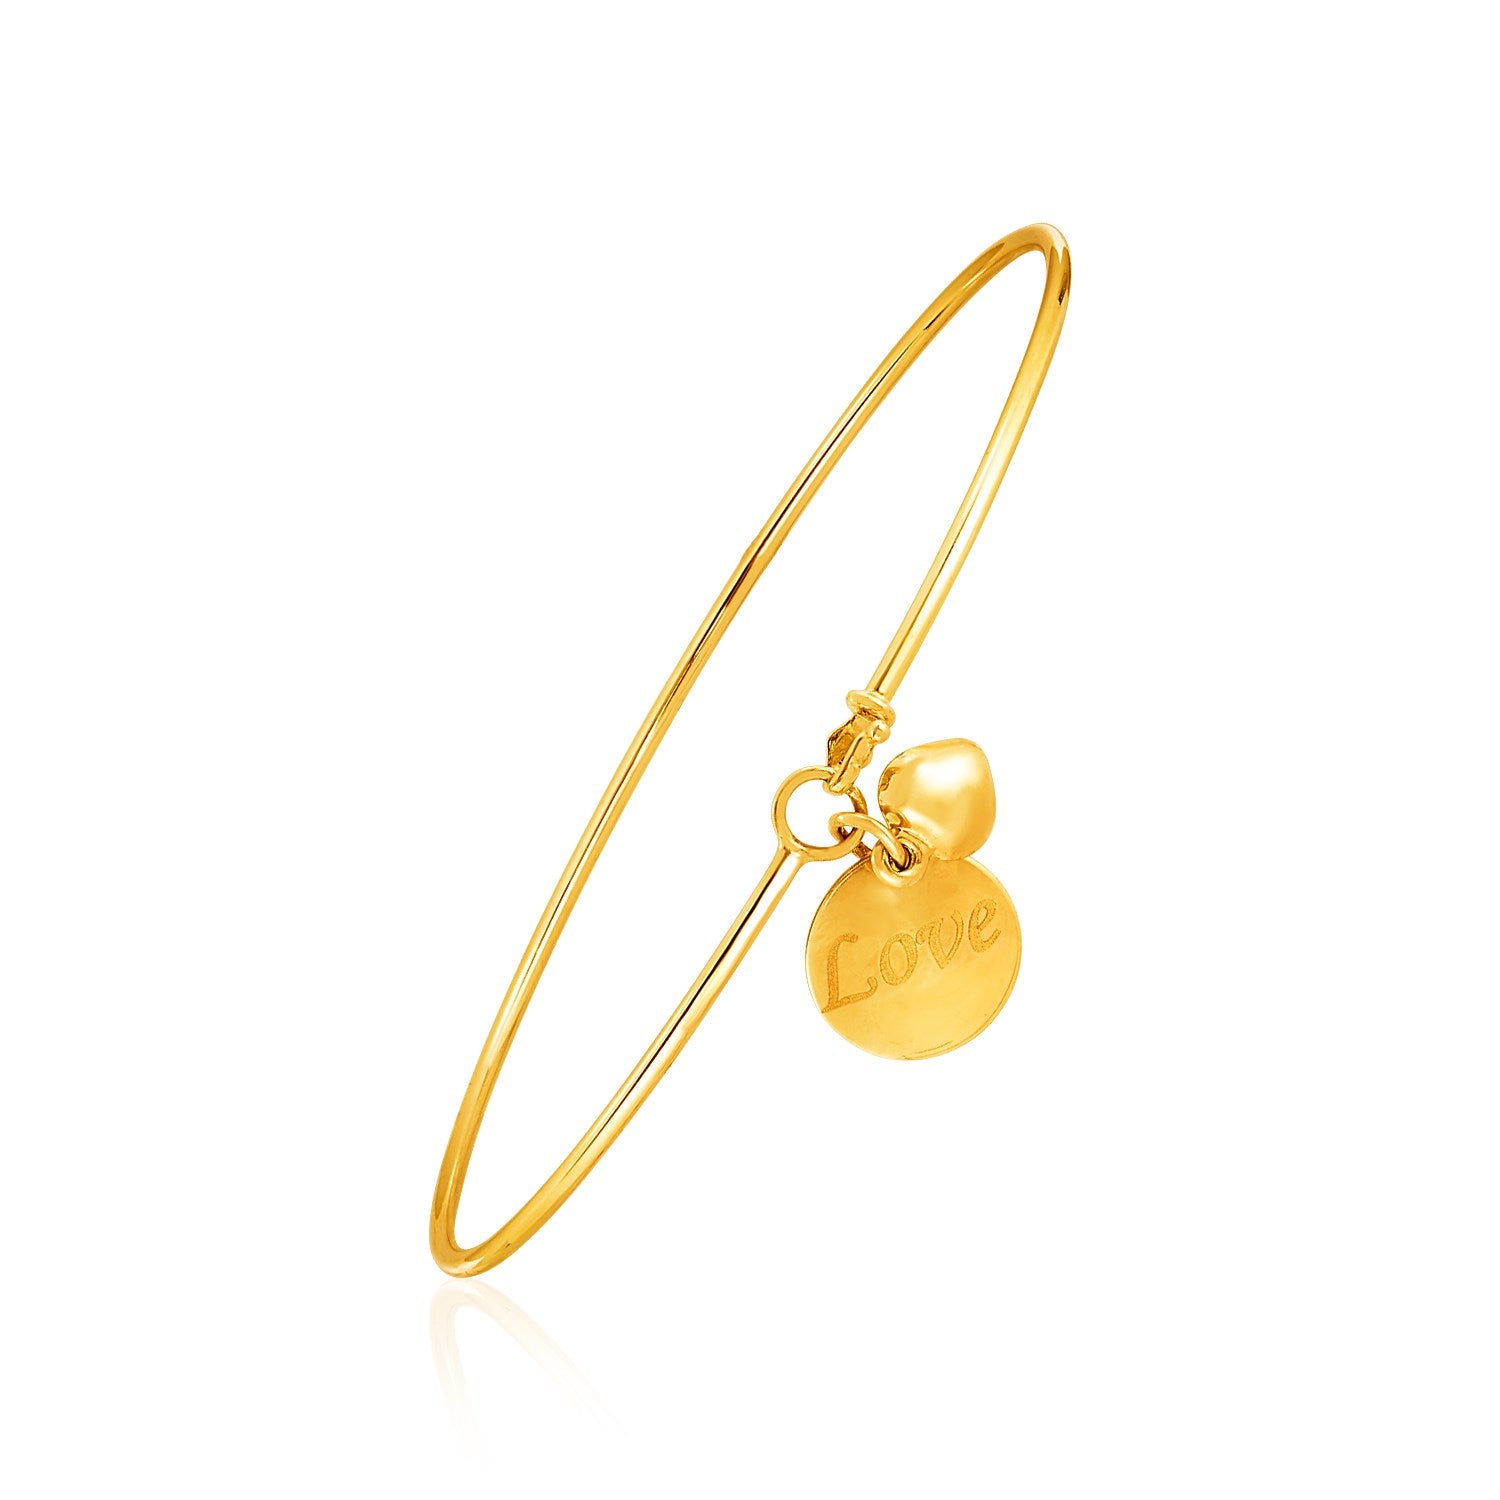 14k Yellow Gold Bangle with EngravedLove and Puffed Heart Charms14k Yellow Gold Bangle with Engraved